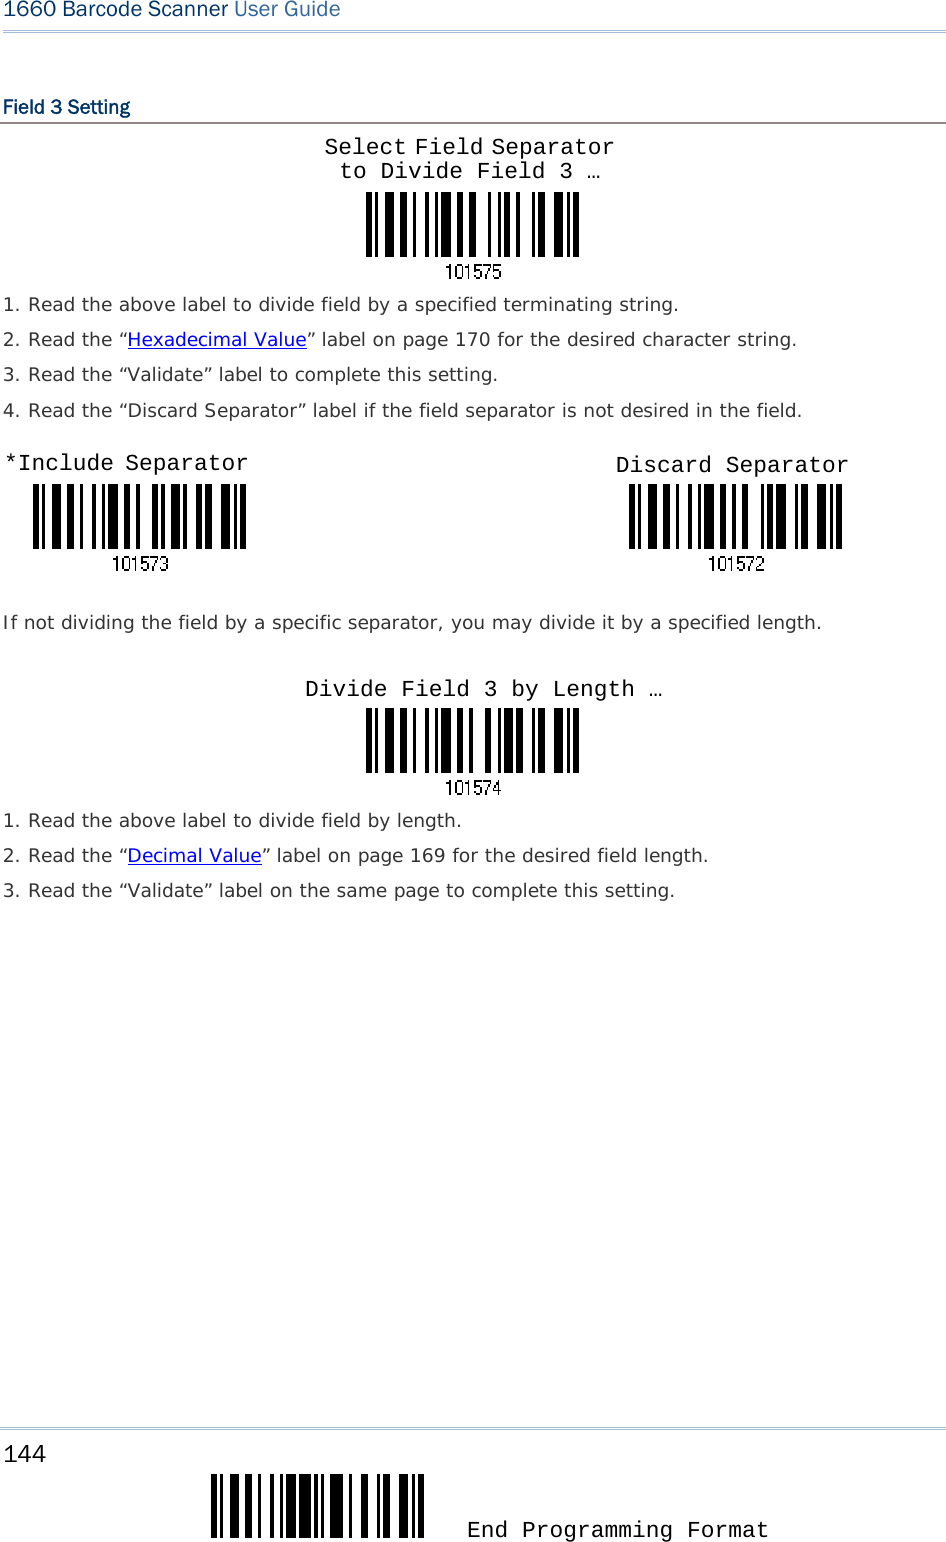 144  End Programming Format 1660 Barcode Scanner User Guide  Field 3 Setting    1. Read the above label to divide field by a specified terminating string. 2. Read the “Hexadecimal Value” label on page 170 for the desired character string.  3. Read the “Validate” label to complete this setting. 4. Read the “Discard Separator” label if the field separator is not desired in the field.                                 If not dividing the field by a specific separator, you may divide it by a specified length.    1. Read the above label to divide field by length. 2. Read the “Decimal Value” label on page 169 for the desired field length. 3. Read the “Validate” label on the same page to complete this setting.                   Select Field Separator to Divide Field 3 … *Include Separator  Discard Separator Divide Field 3 by Length …